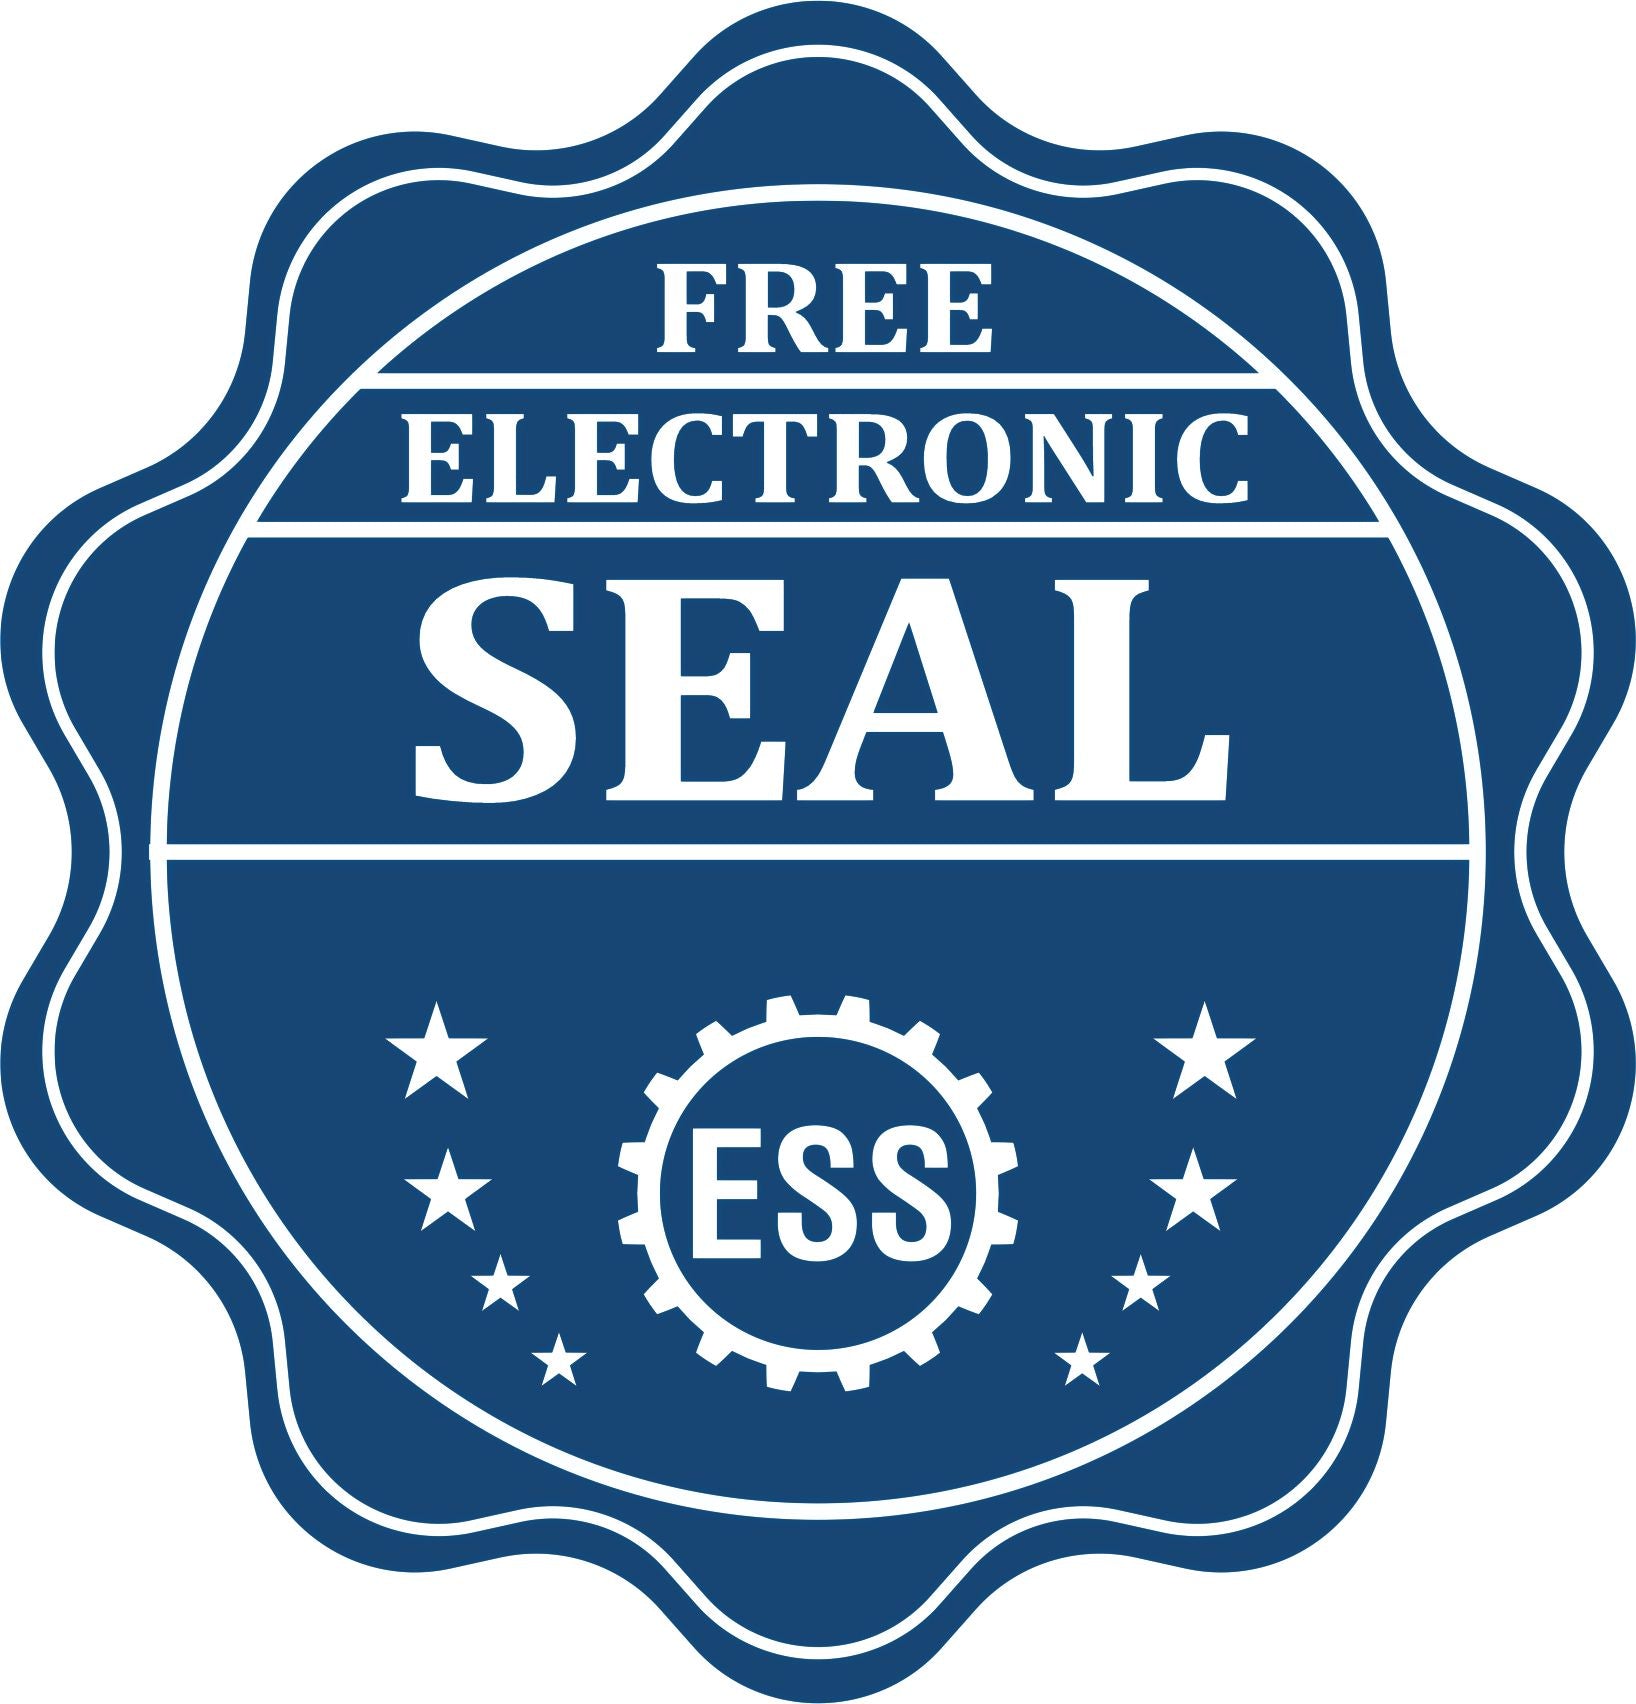 A badge showing a free electronic seal for the Soft Illinois Professional Geologist Seal with stars and the ESS gear on the emblem.